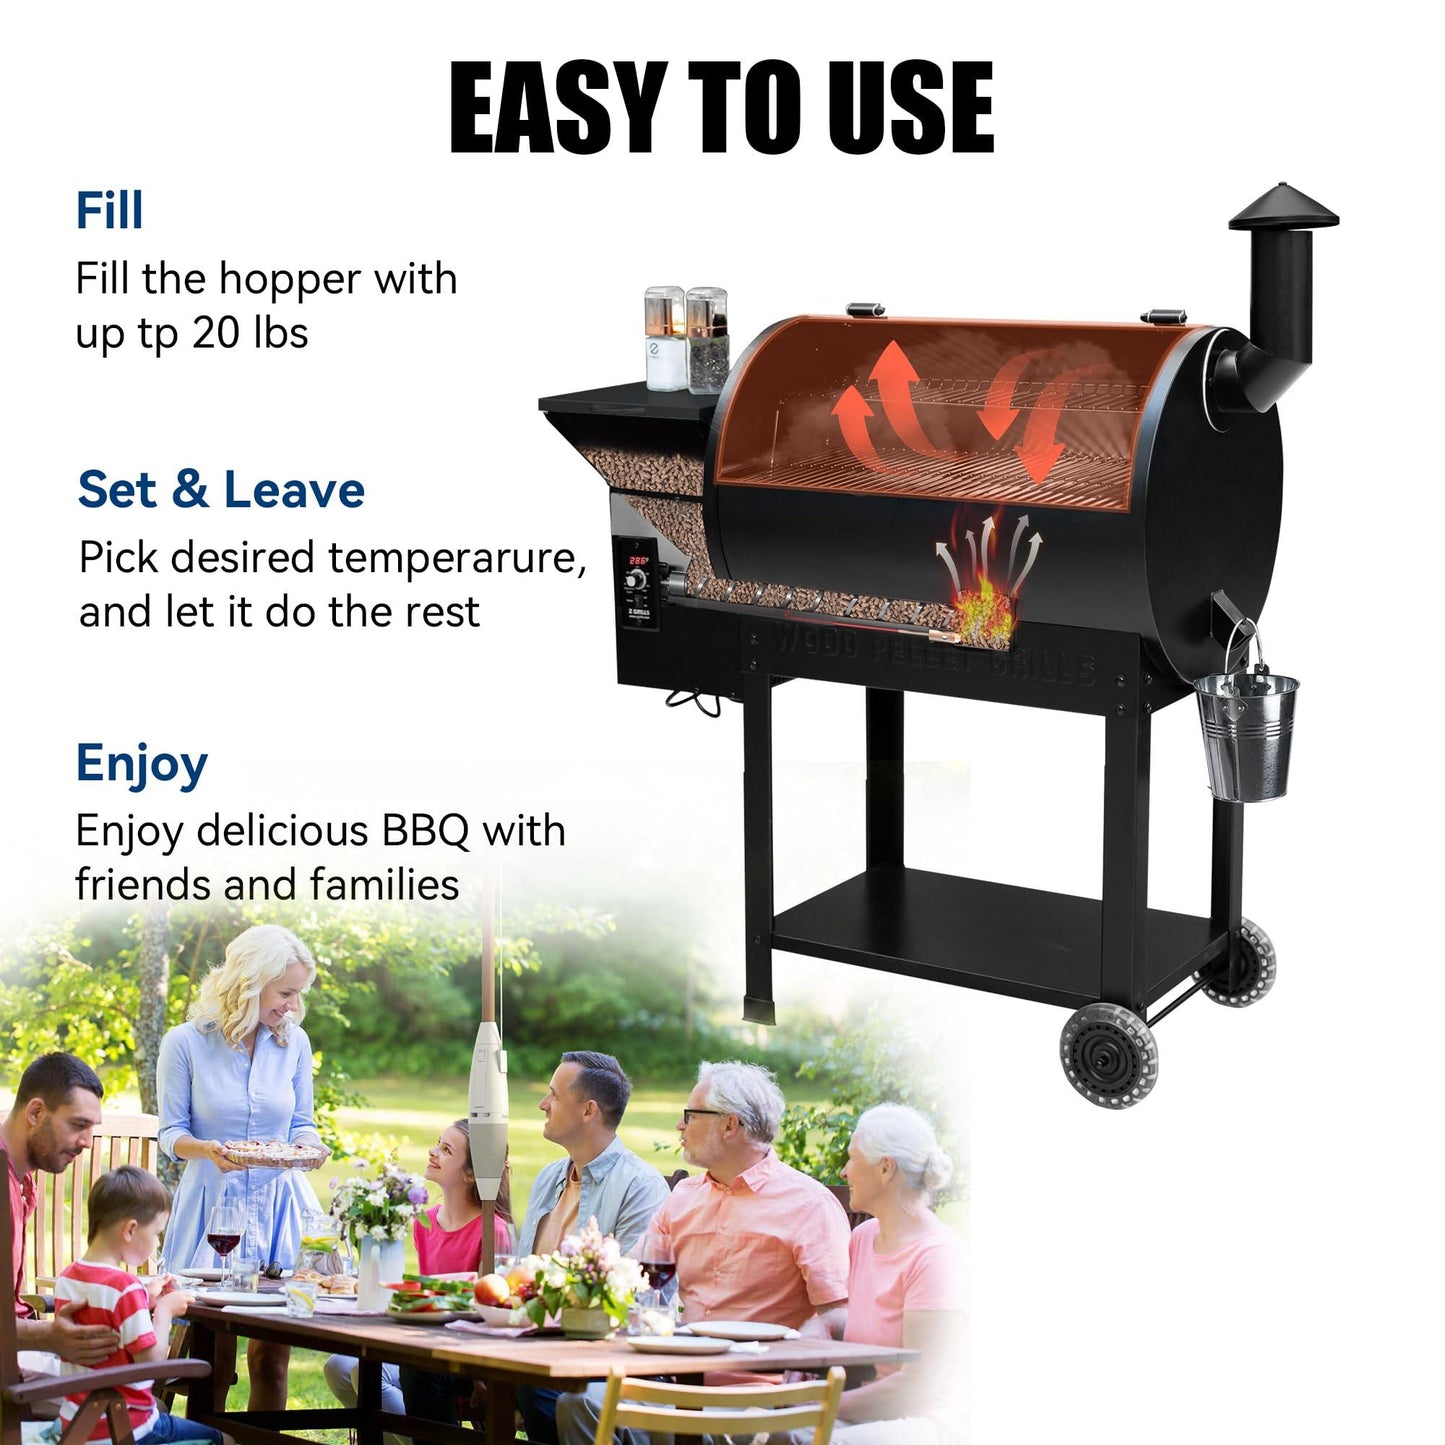 Z GRILLS Pellet Smoker Grill with PID Control, Rain Cover, 700 sq. in Cooking Area for Outdoor BBQ, ZPG-7002B - CookCave